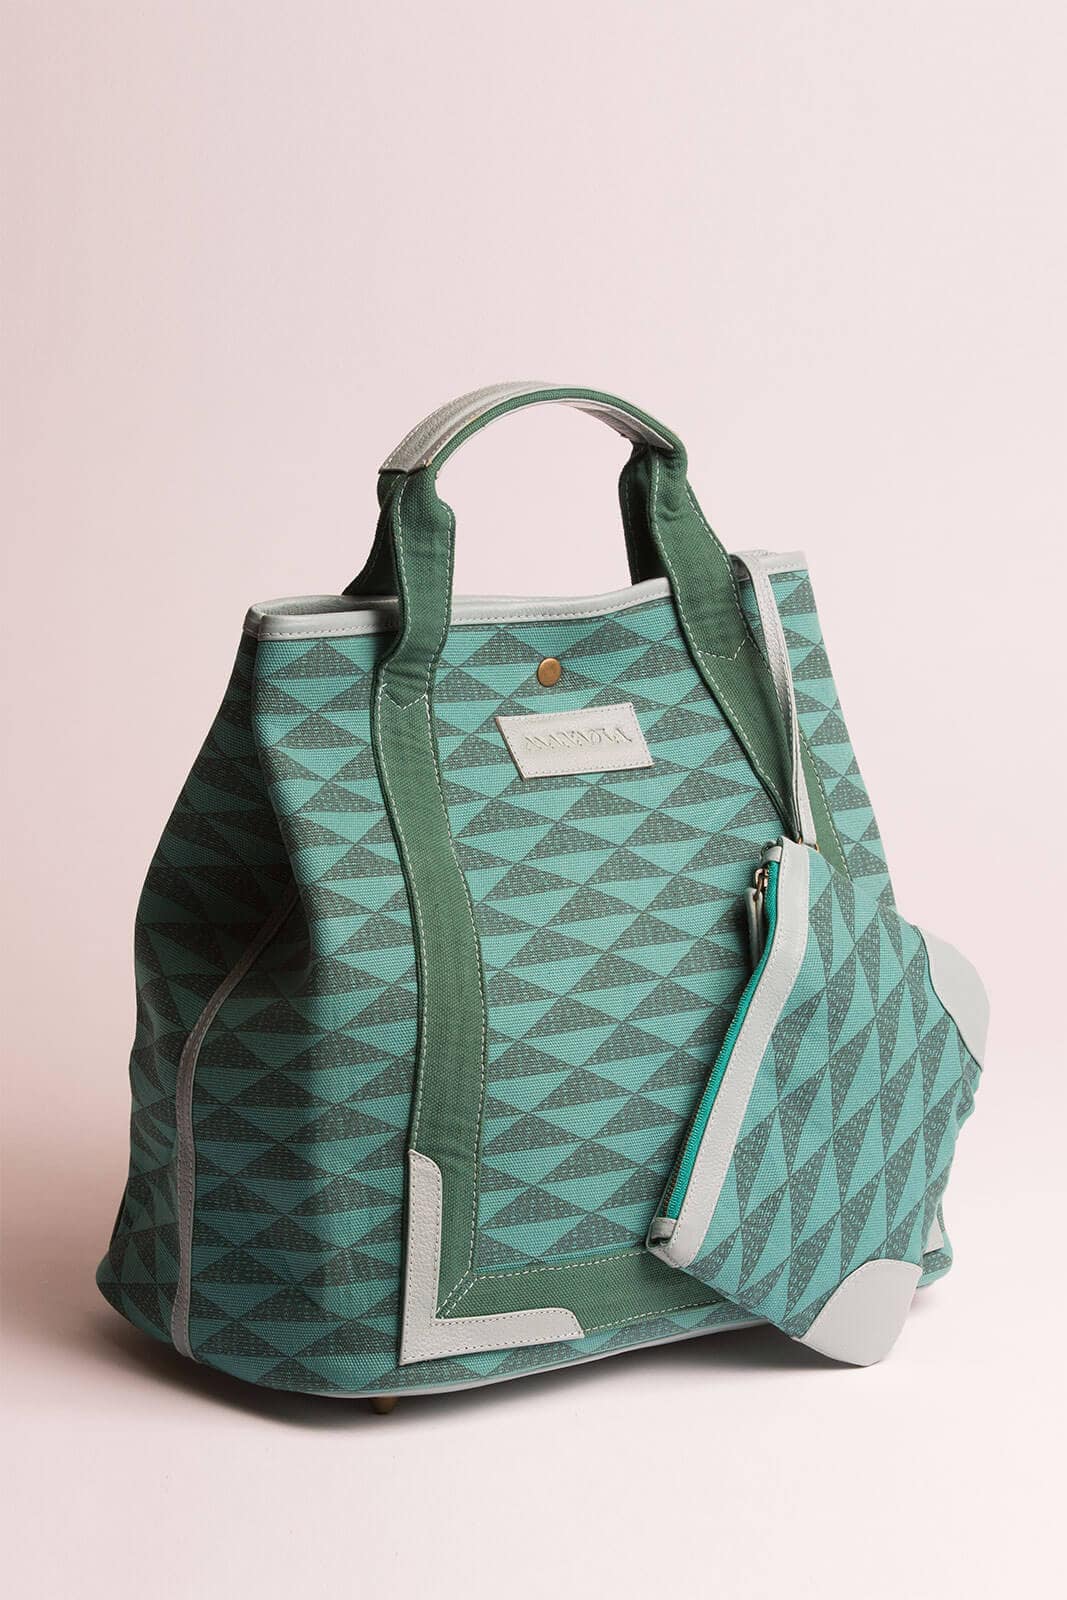 Manaola Duffle Bag in Green and Teal